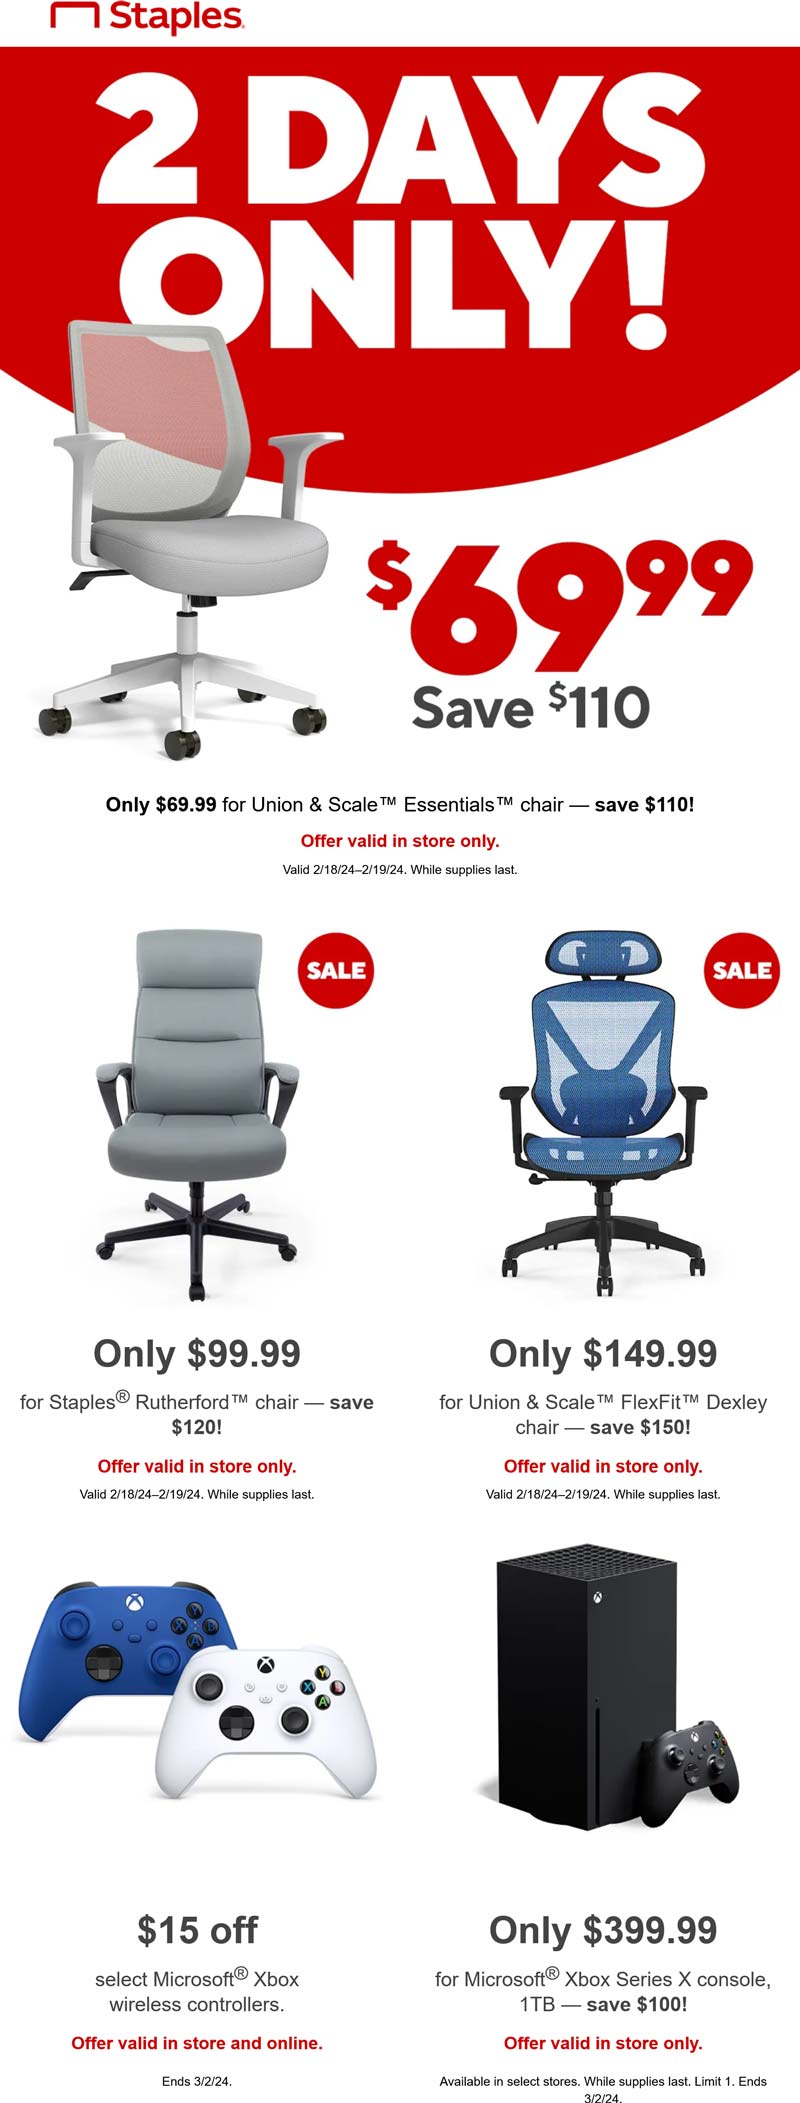 Staples stores Coupon  $70 office chair & $15 off Xbox controllers at Staples #staples 